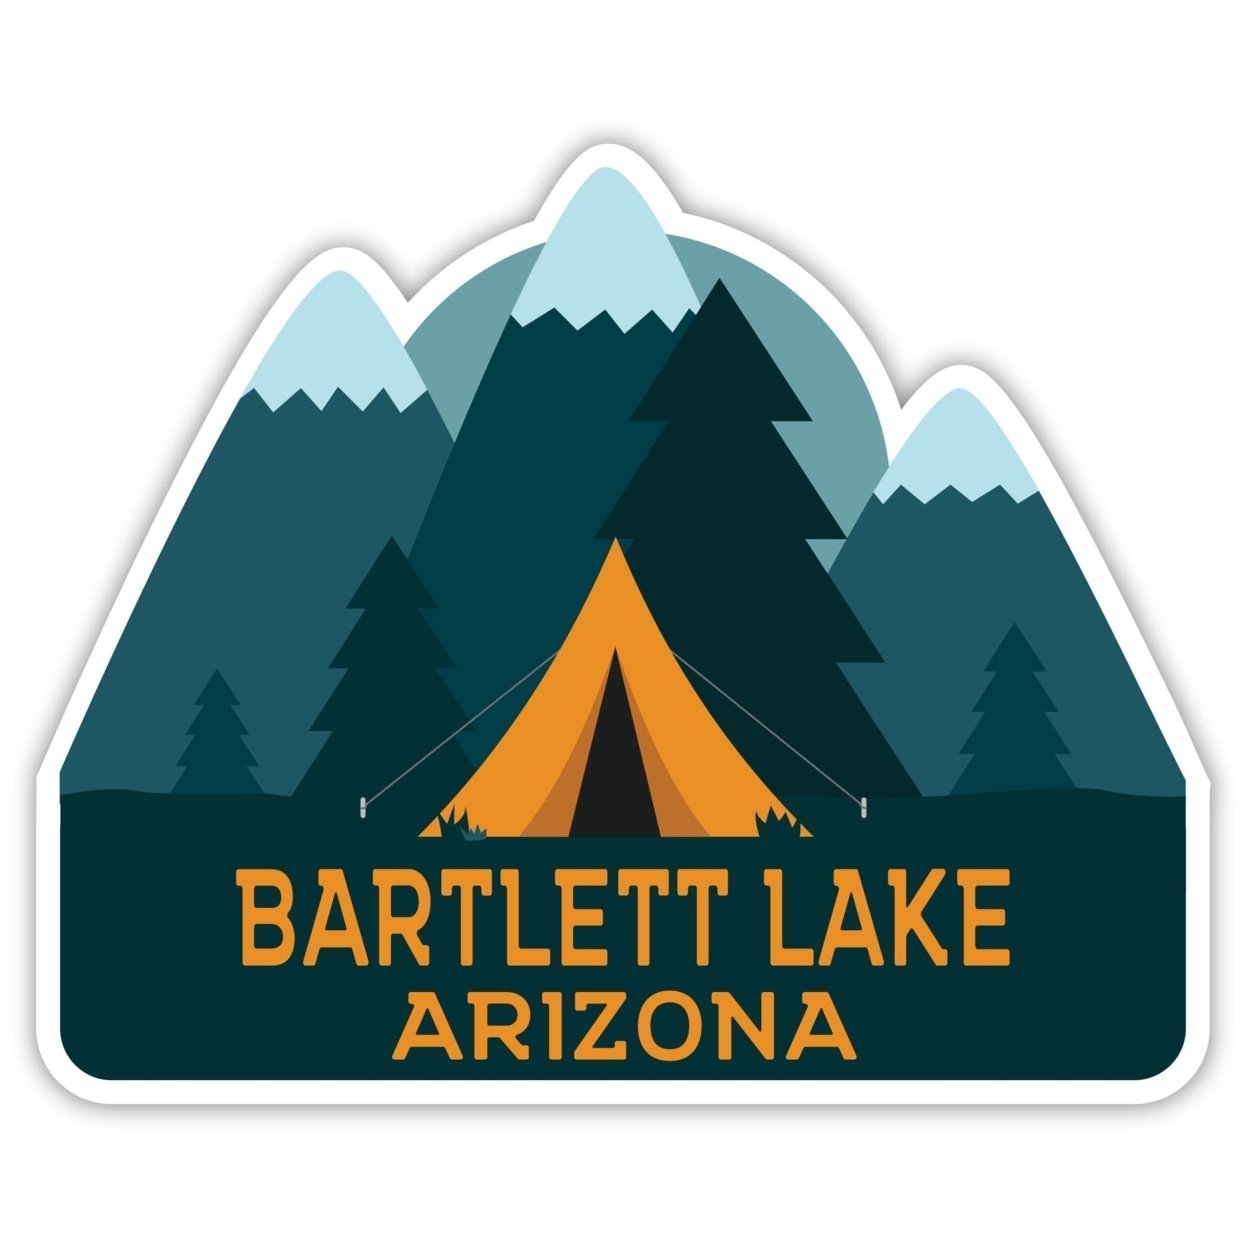 Bartlett Lake Arizona Souvenir Decorative Stickers (Choose Theme And Size) - 4-Pack, 8-Inch, Great Outdoors